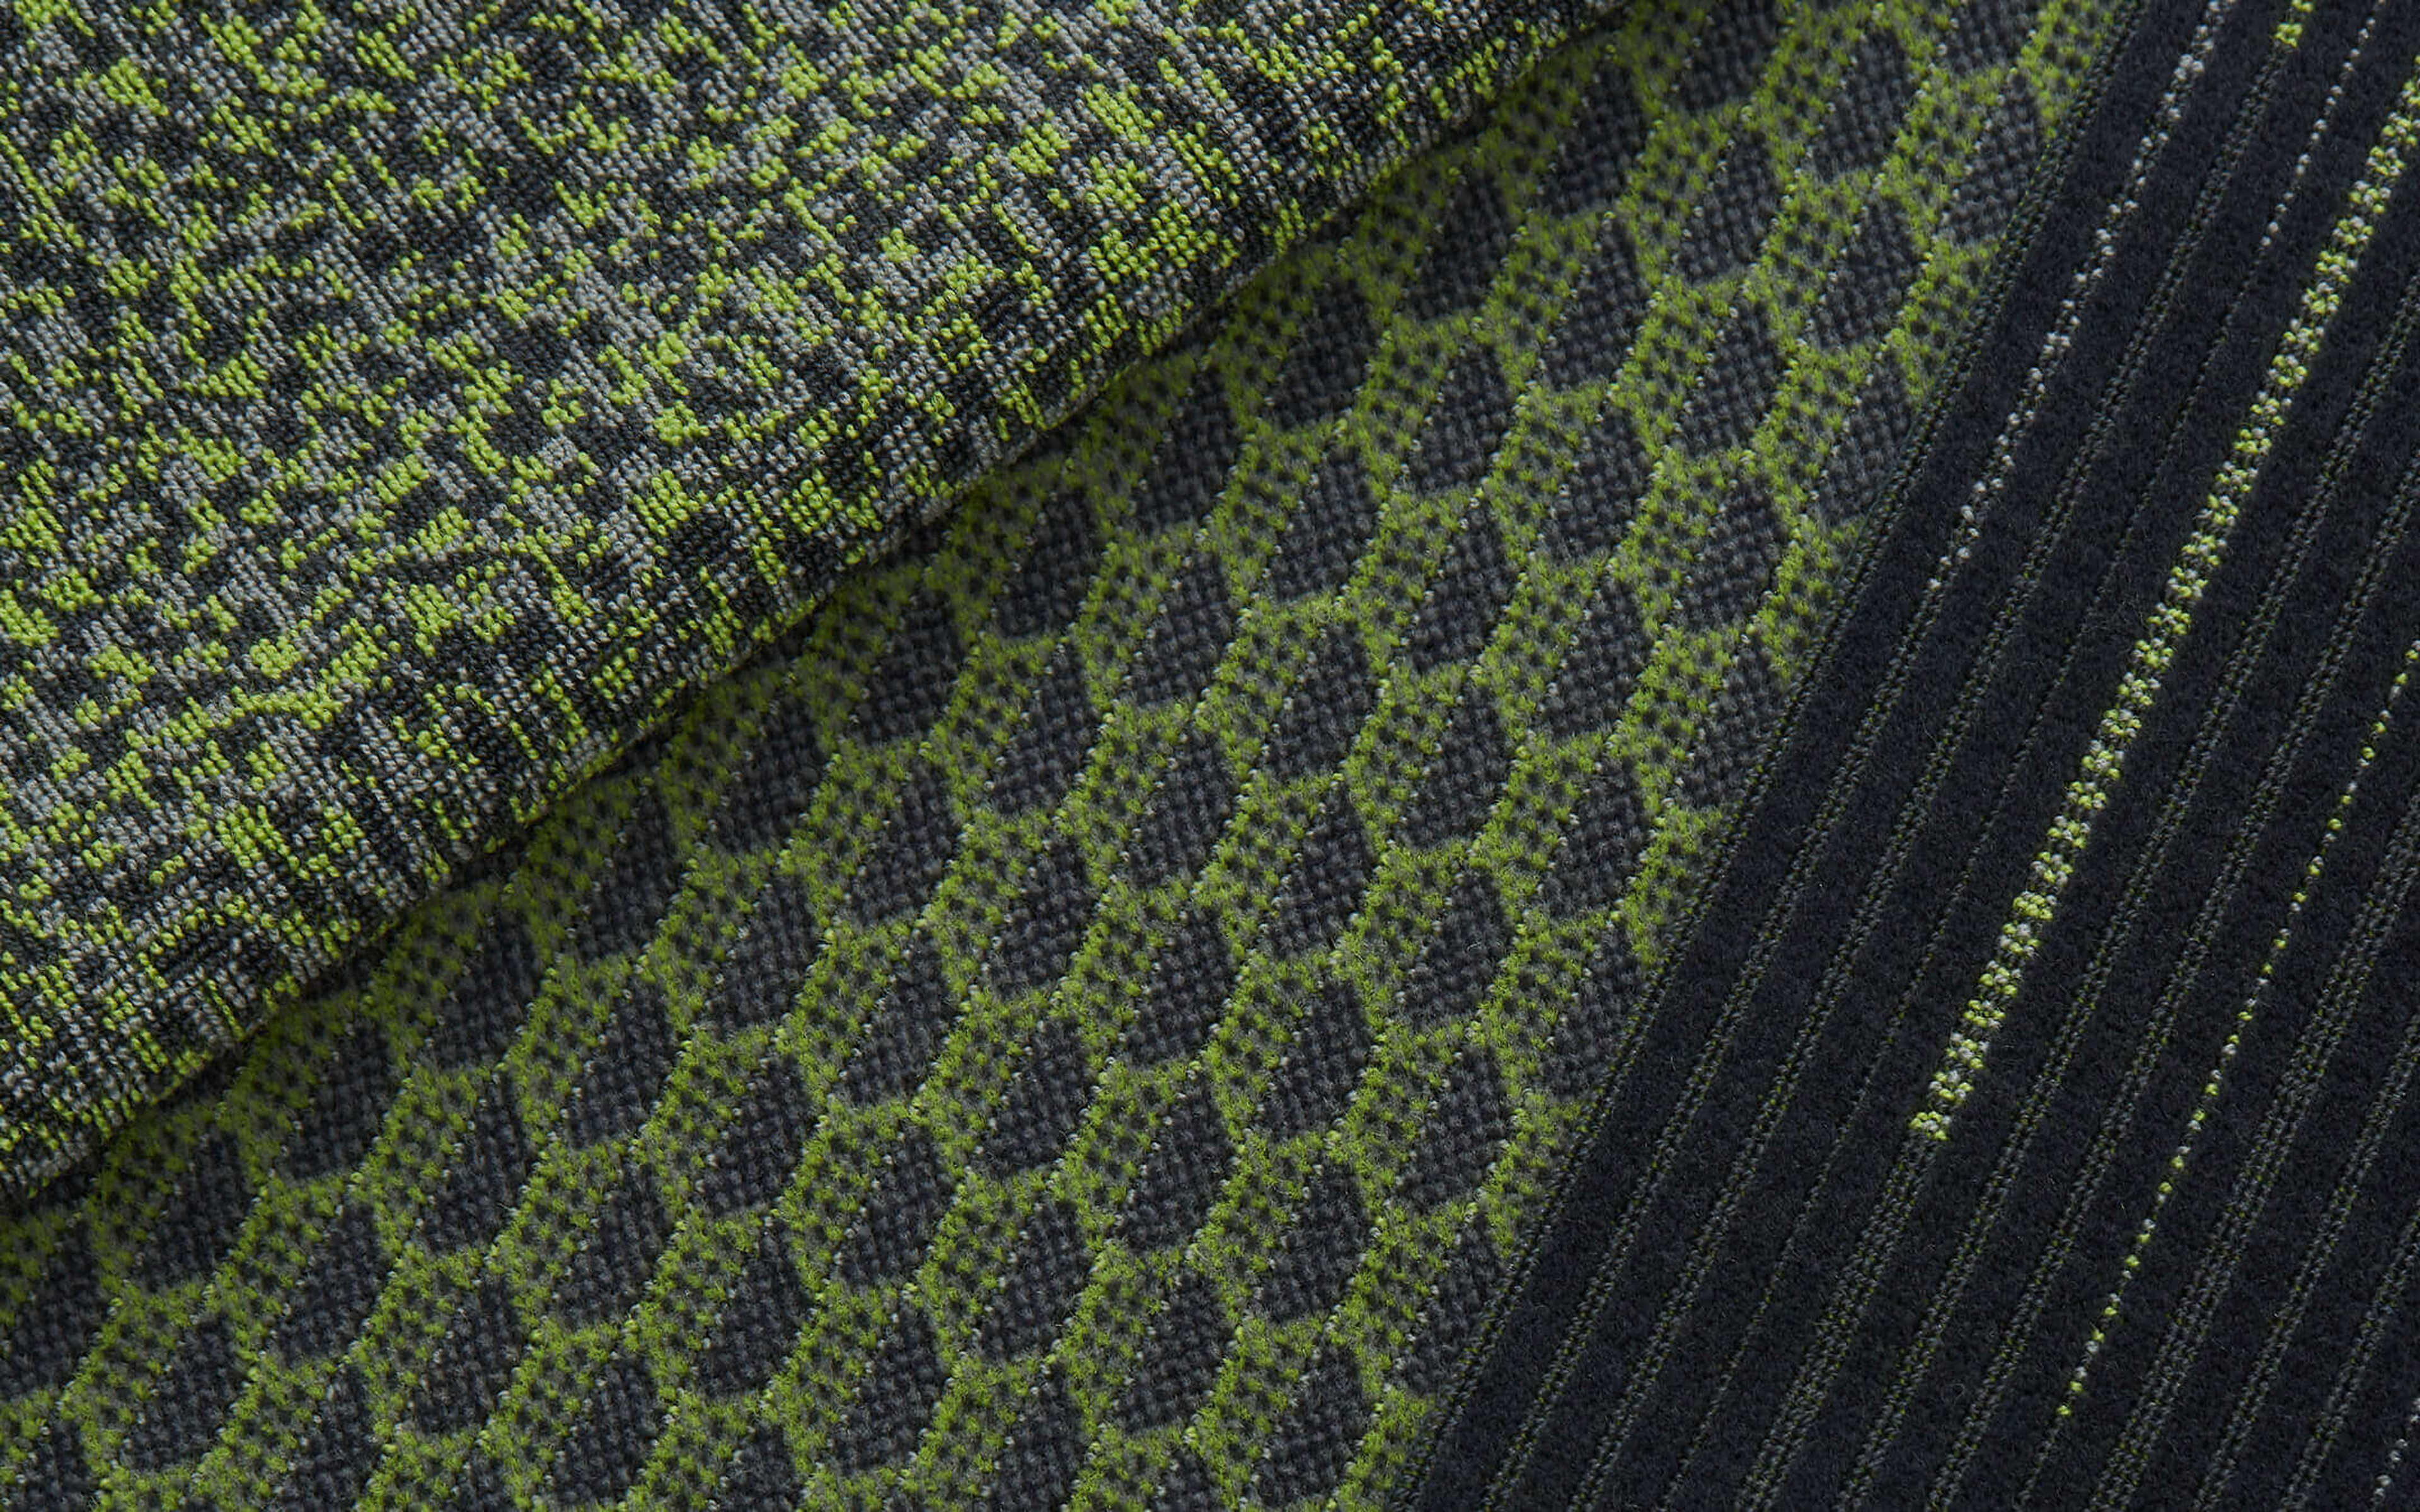 Wired, a strikingly modern transport textile